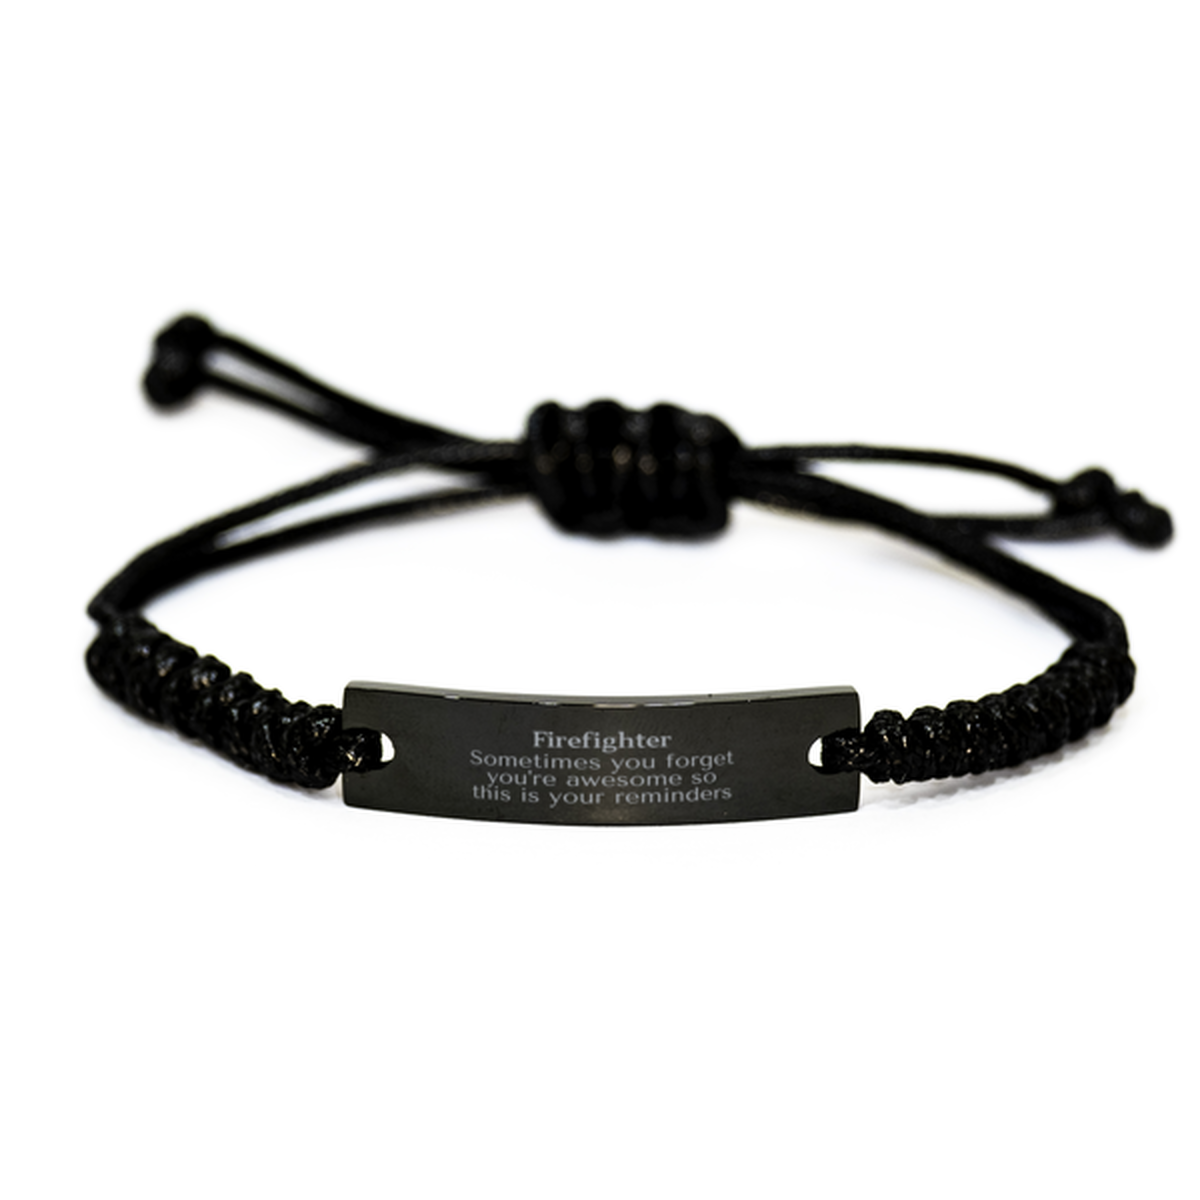 Sentimental Firefighter Black Rope Bracelet, Firefighter Sometimes you forget you're awesome so this is your reminders, Graduation Christmas Birthday Gifts for Firefighter, Men, Women, Coworkers